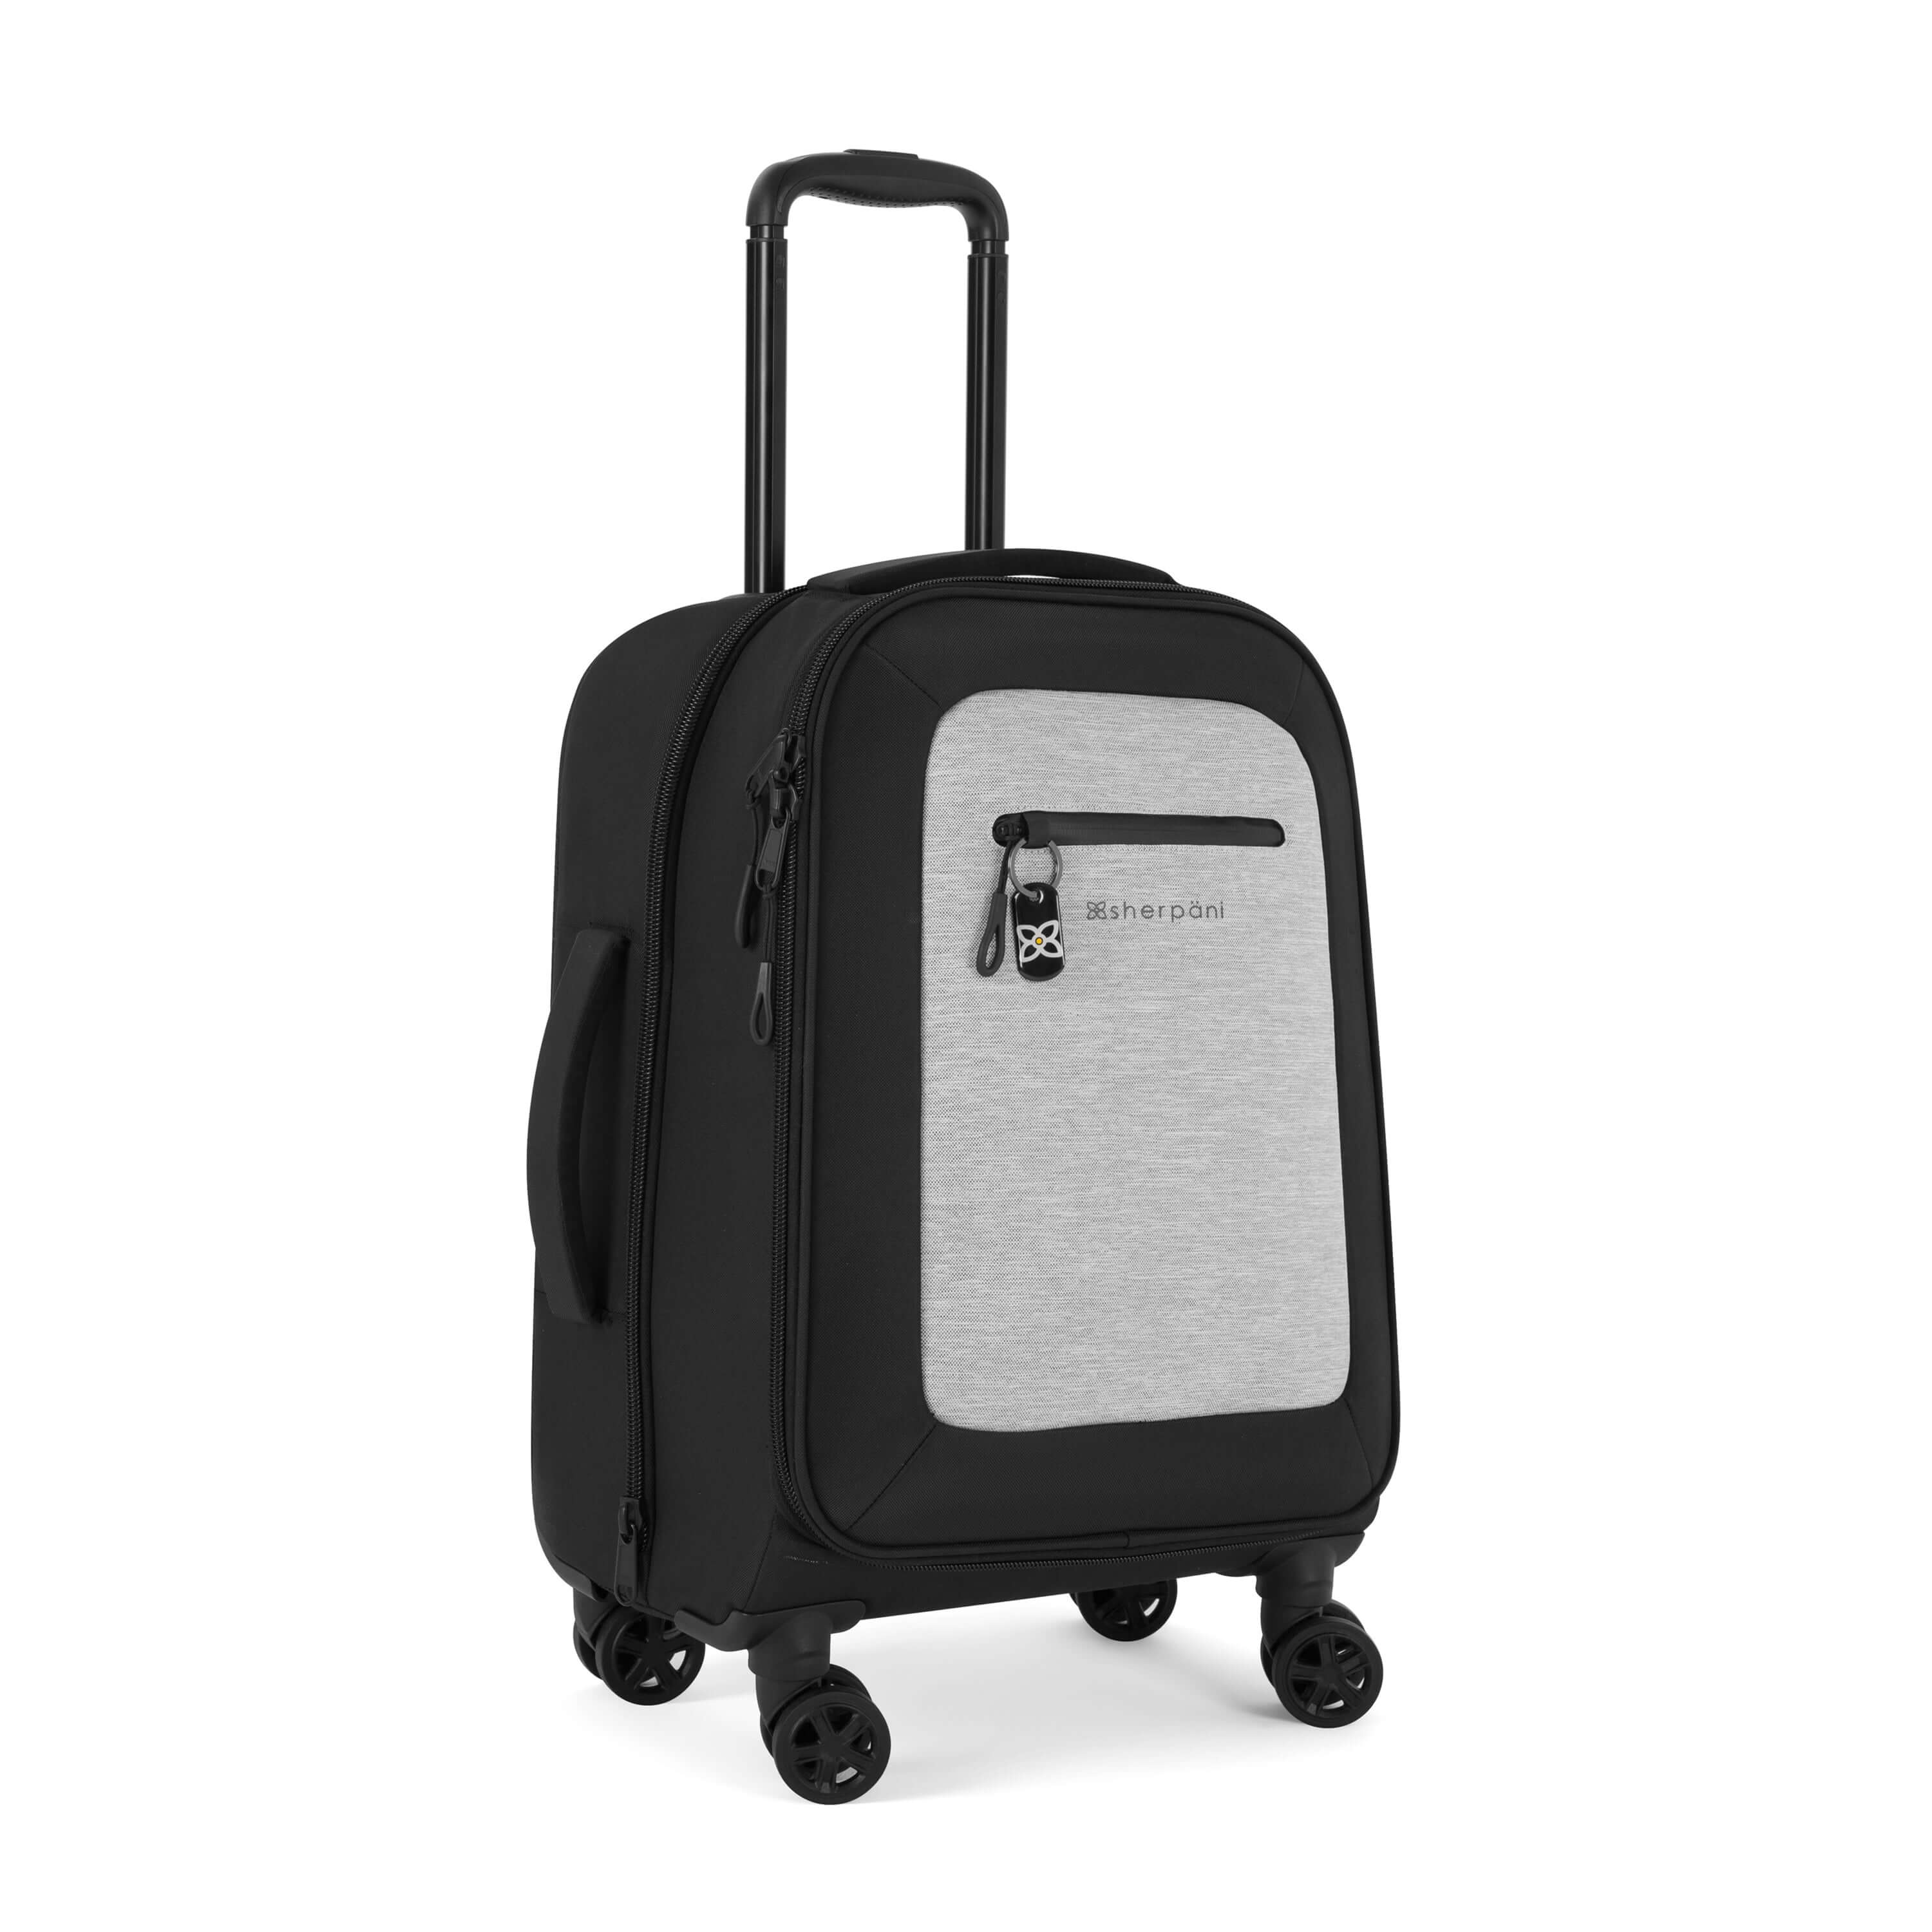 Angled front view of Sherpani's Anti-Theft luggage the Latitude in Sterling. The suitcase has a soft shell exterior made from recycled plastic bottles and features vegan leather accents in black. There is a main zipper compartment, an expansion zipper and an external pocket on the front with a locking zipper and a ReturnMe tag. On the top of the suitcase sits a retractable luggage handle. On the side sits an easy-access handle. At the bottom are four 360-degree spinner wheels for rolling. 